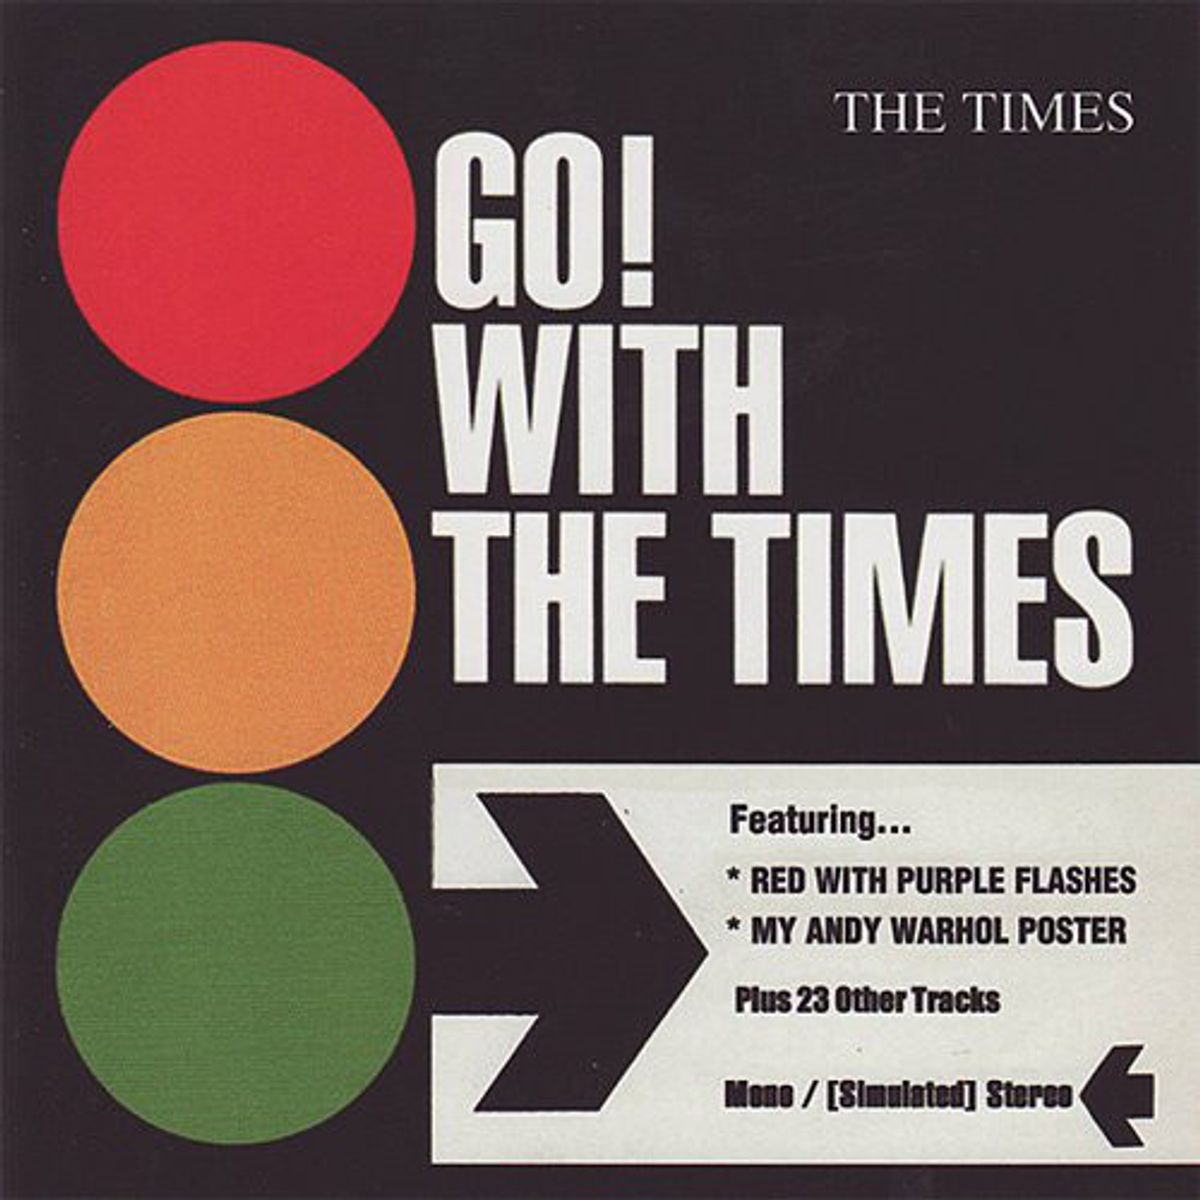 The Times - 'Go! With The Times' 